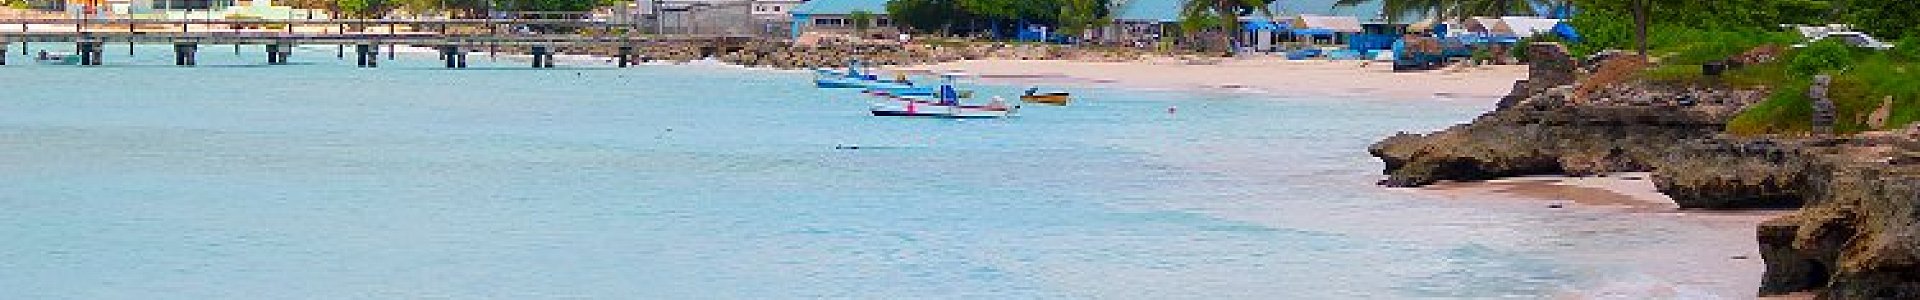 Oistins and South coats page cover image of beach car rental bridgetown barbados